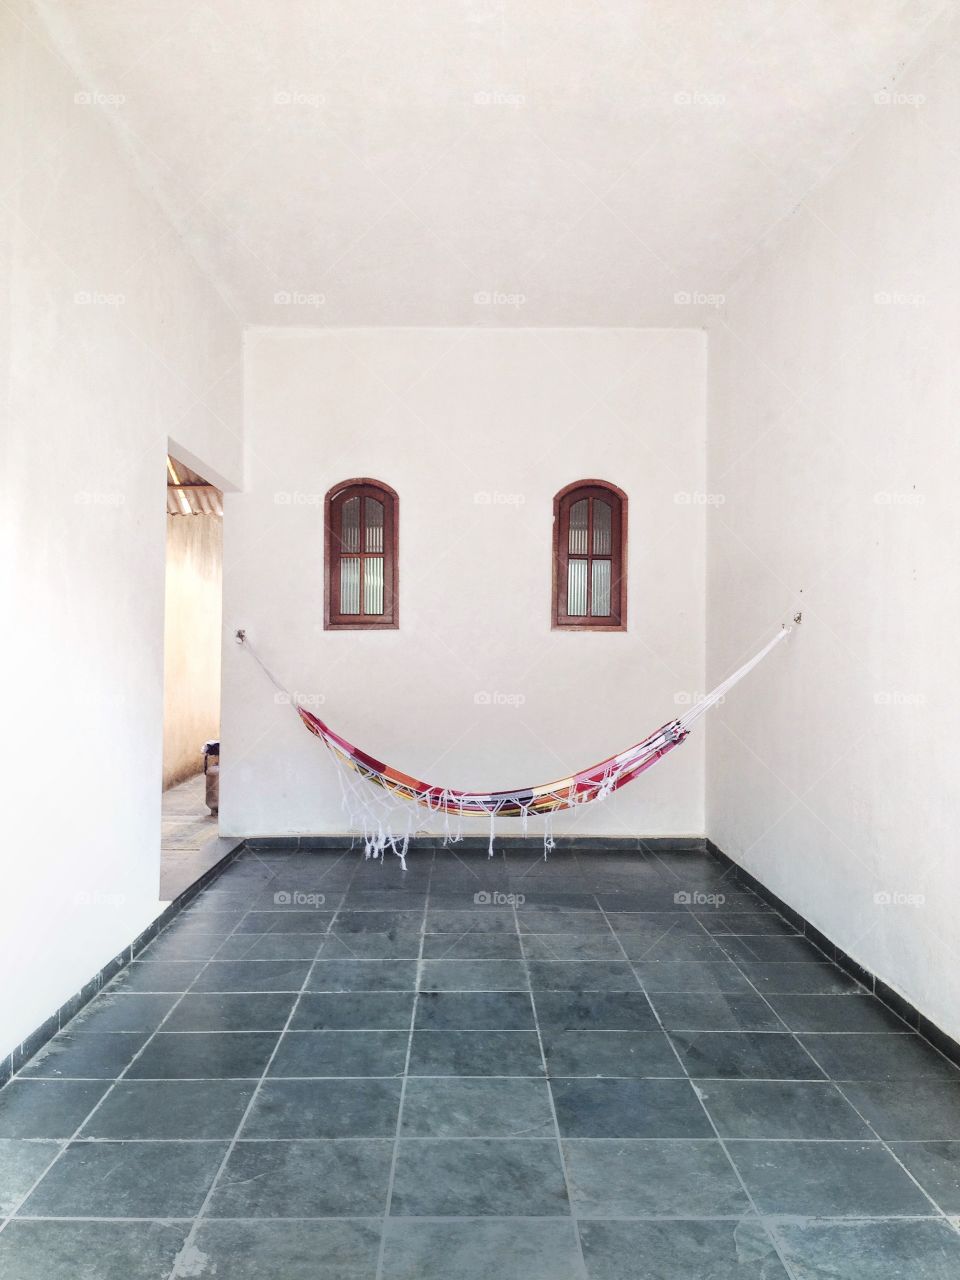 Hammock hanging in front view wall